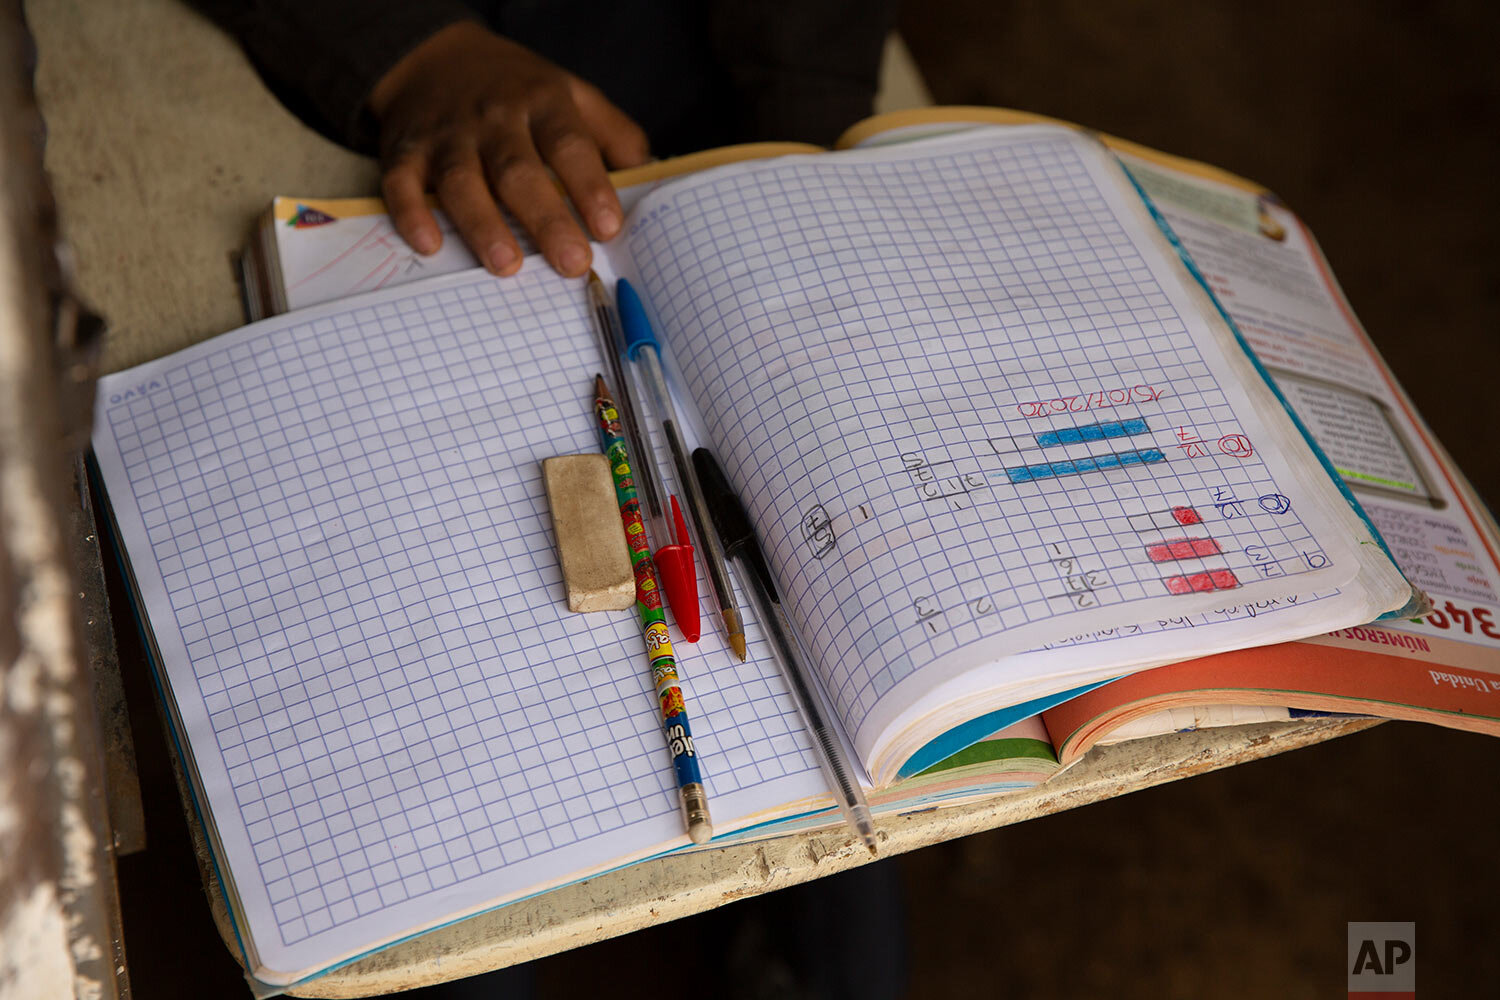  Oscar Rojas, 11, readies his notebooks, pens and pencils, as he prepares for the arrival of his teacher Gerardo Ixcoy, in Santa Cruz del Quiche, Guatemala, Wednesday, July 15, 2020. "I tried to get the kids their work sheets sending instructions via